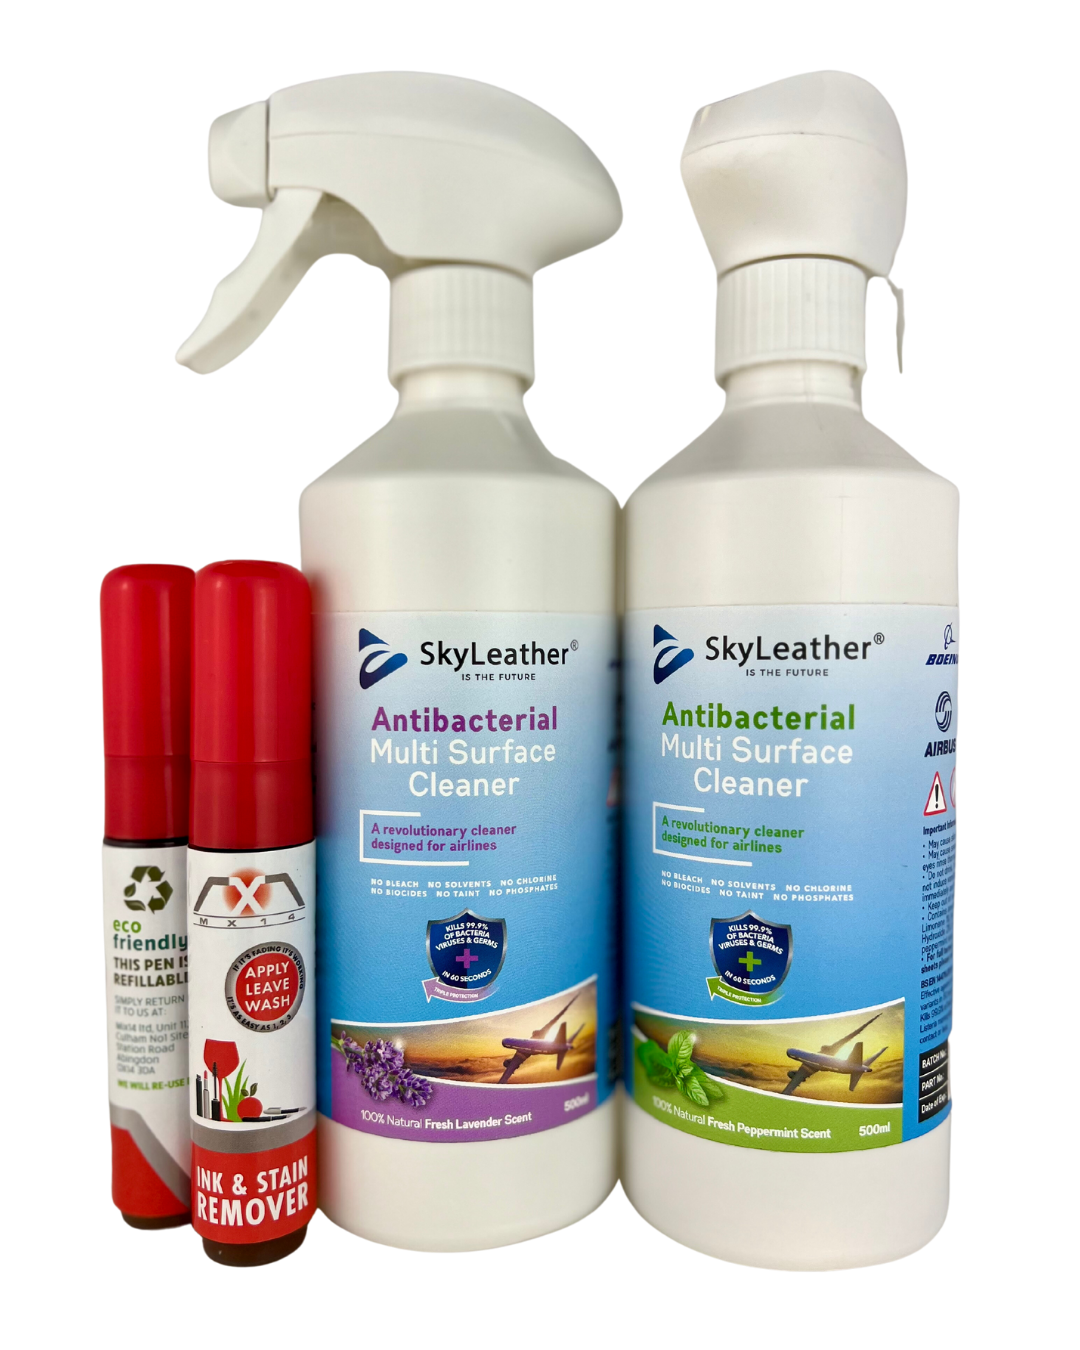 Anti-bacterial and antiviral certified cleaning product